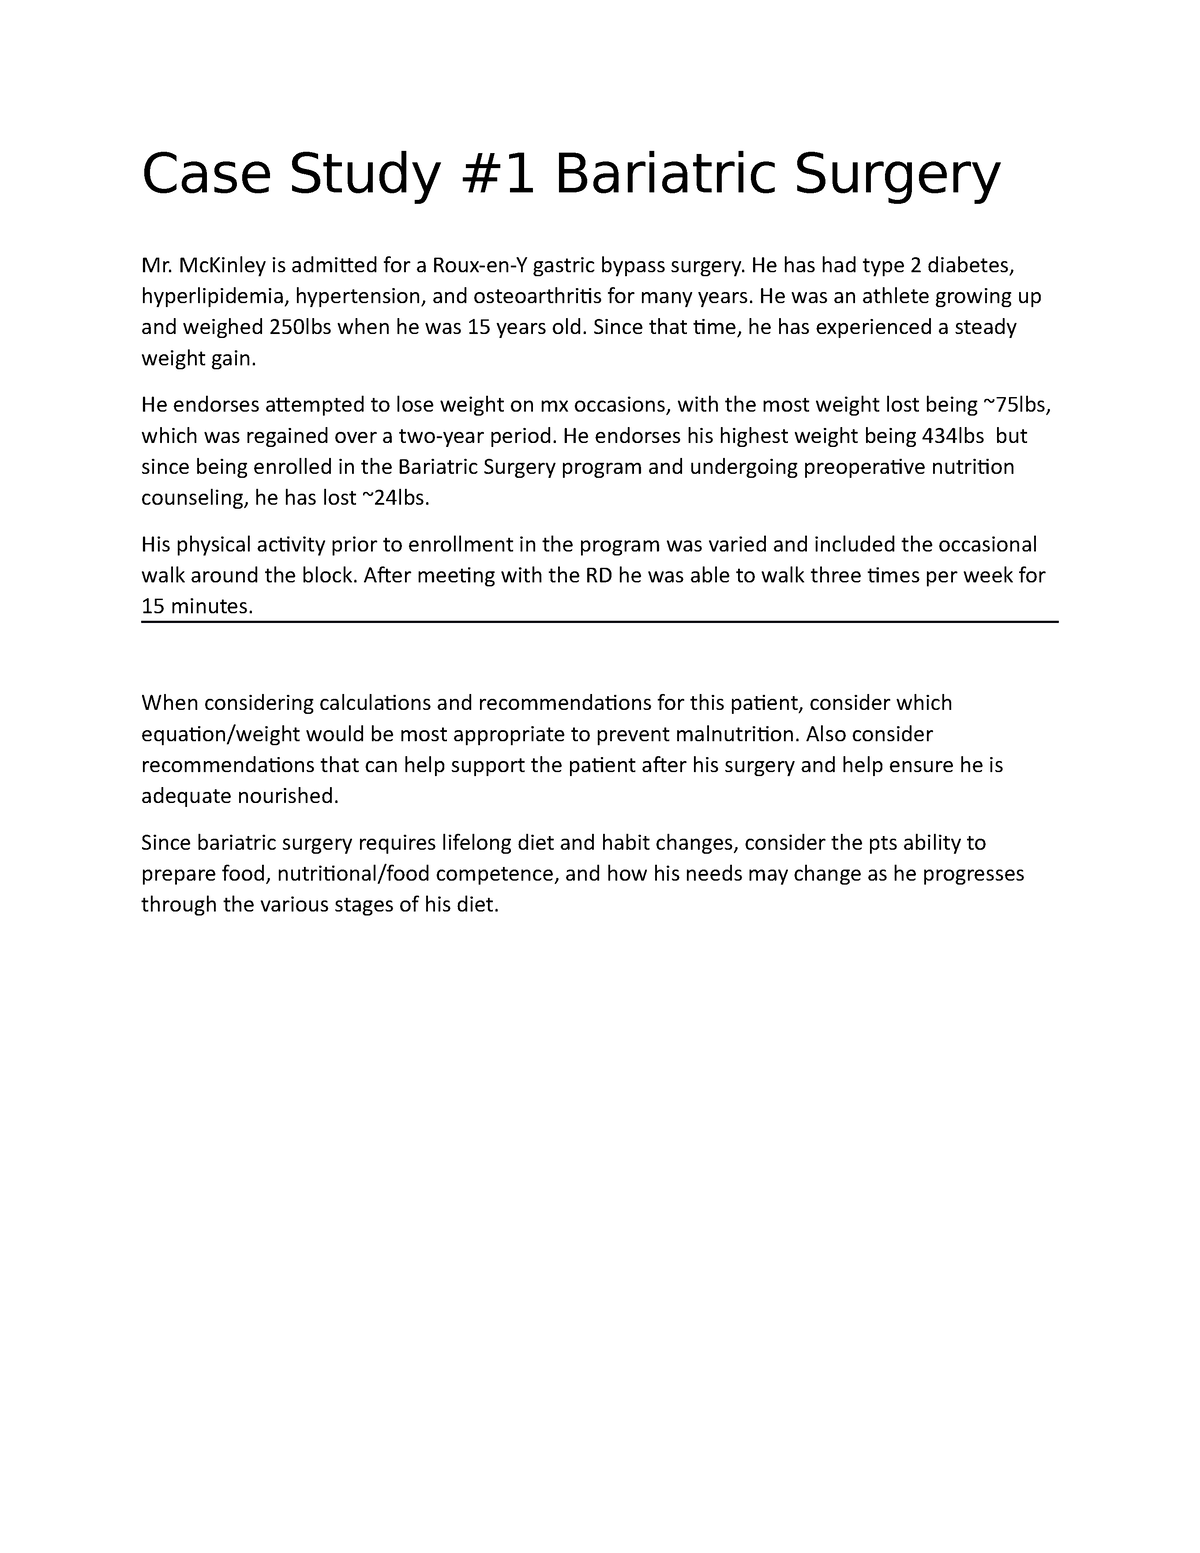 a case study on bariatric surgery